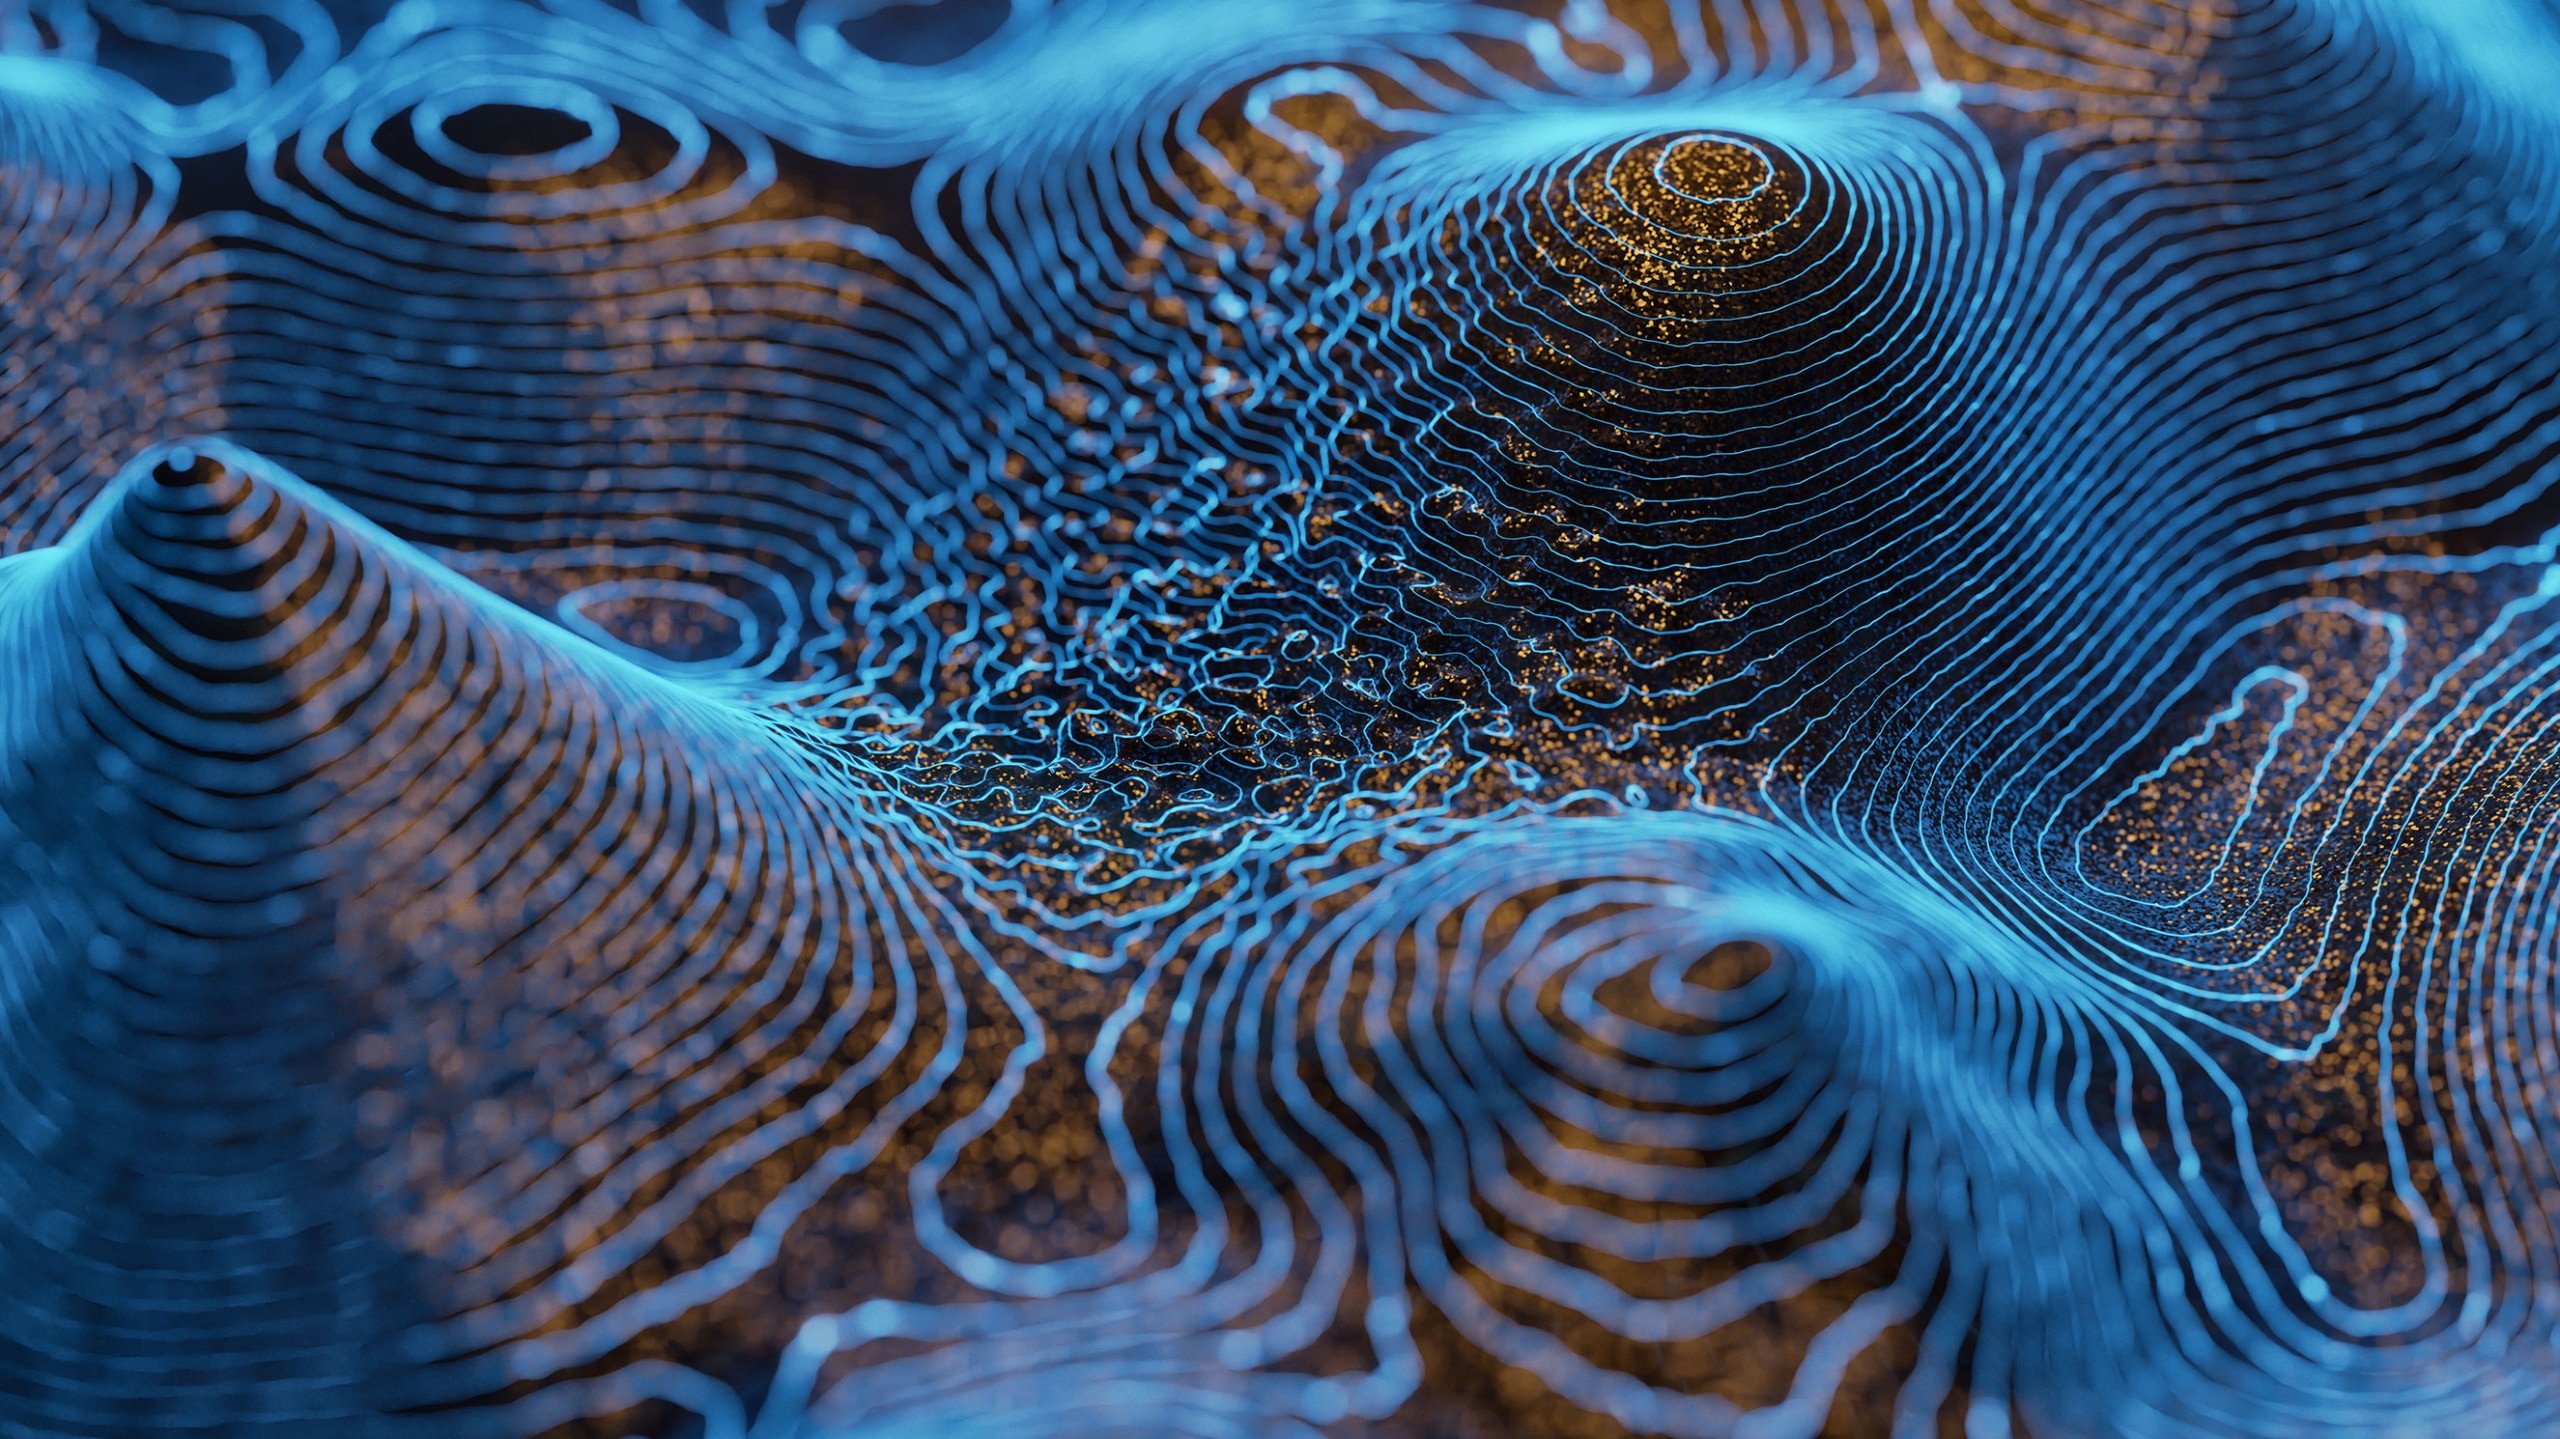 Digital art showing a complex blue landscape of undulating waves and peaks formed by luminous lines, evoking a sense of a futuristic or digital topography.